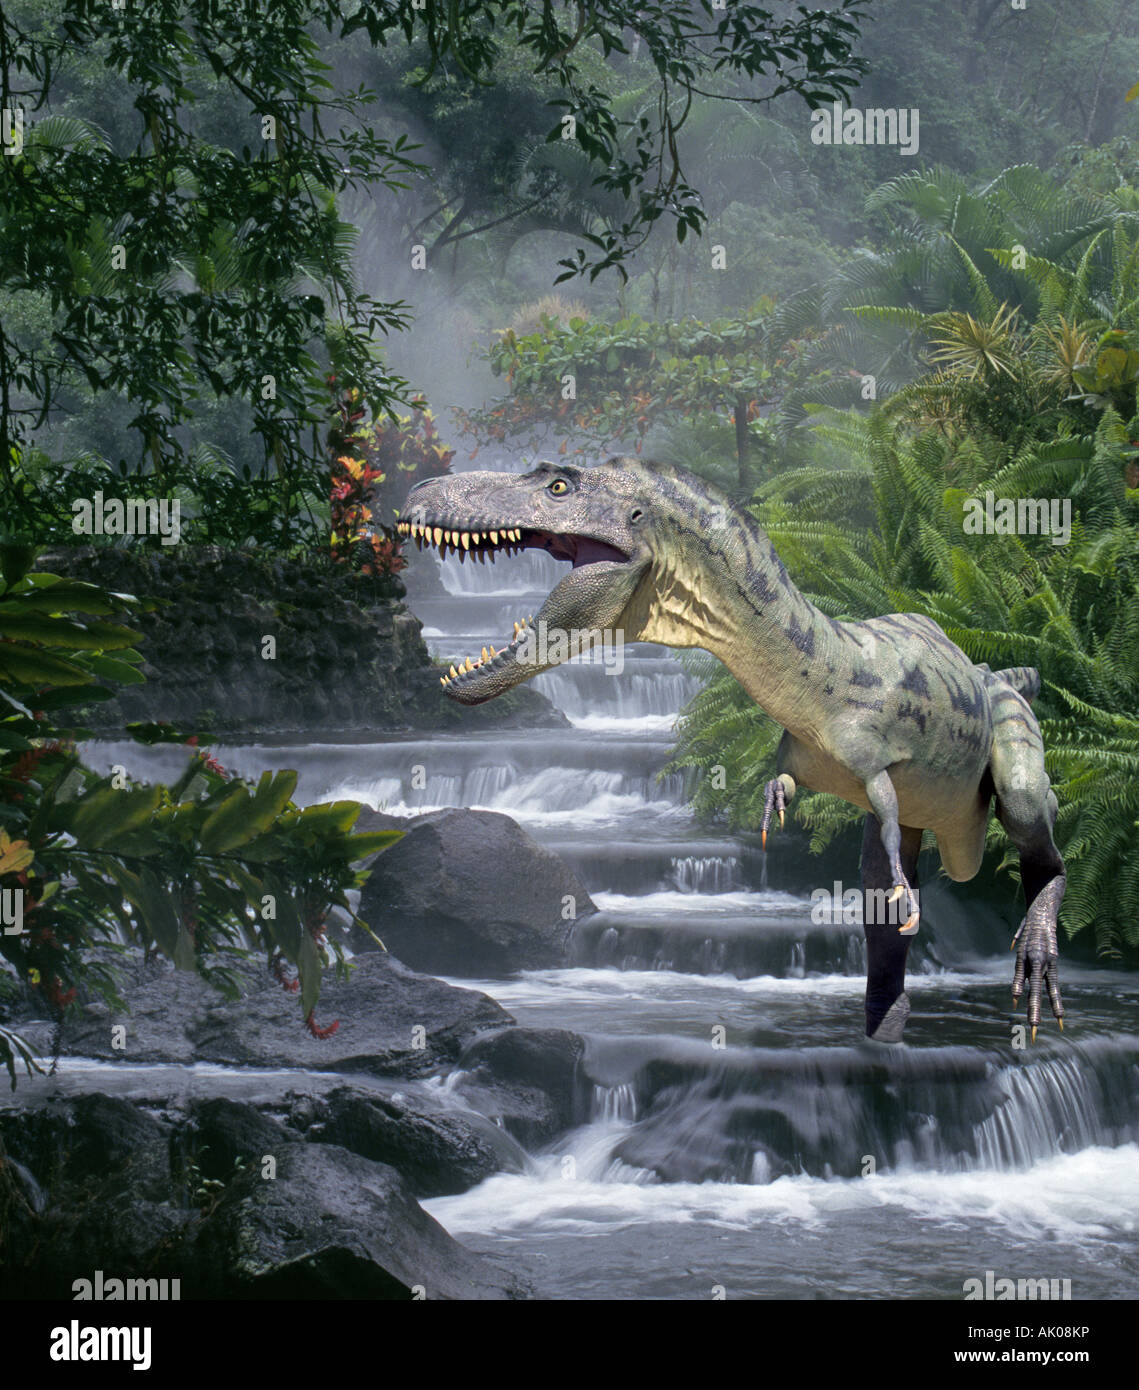 View of a small meat eating dinosaur probably an Alxasaurus hunting along a small stream during the Cretaceous period Stock Photo